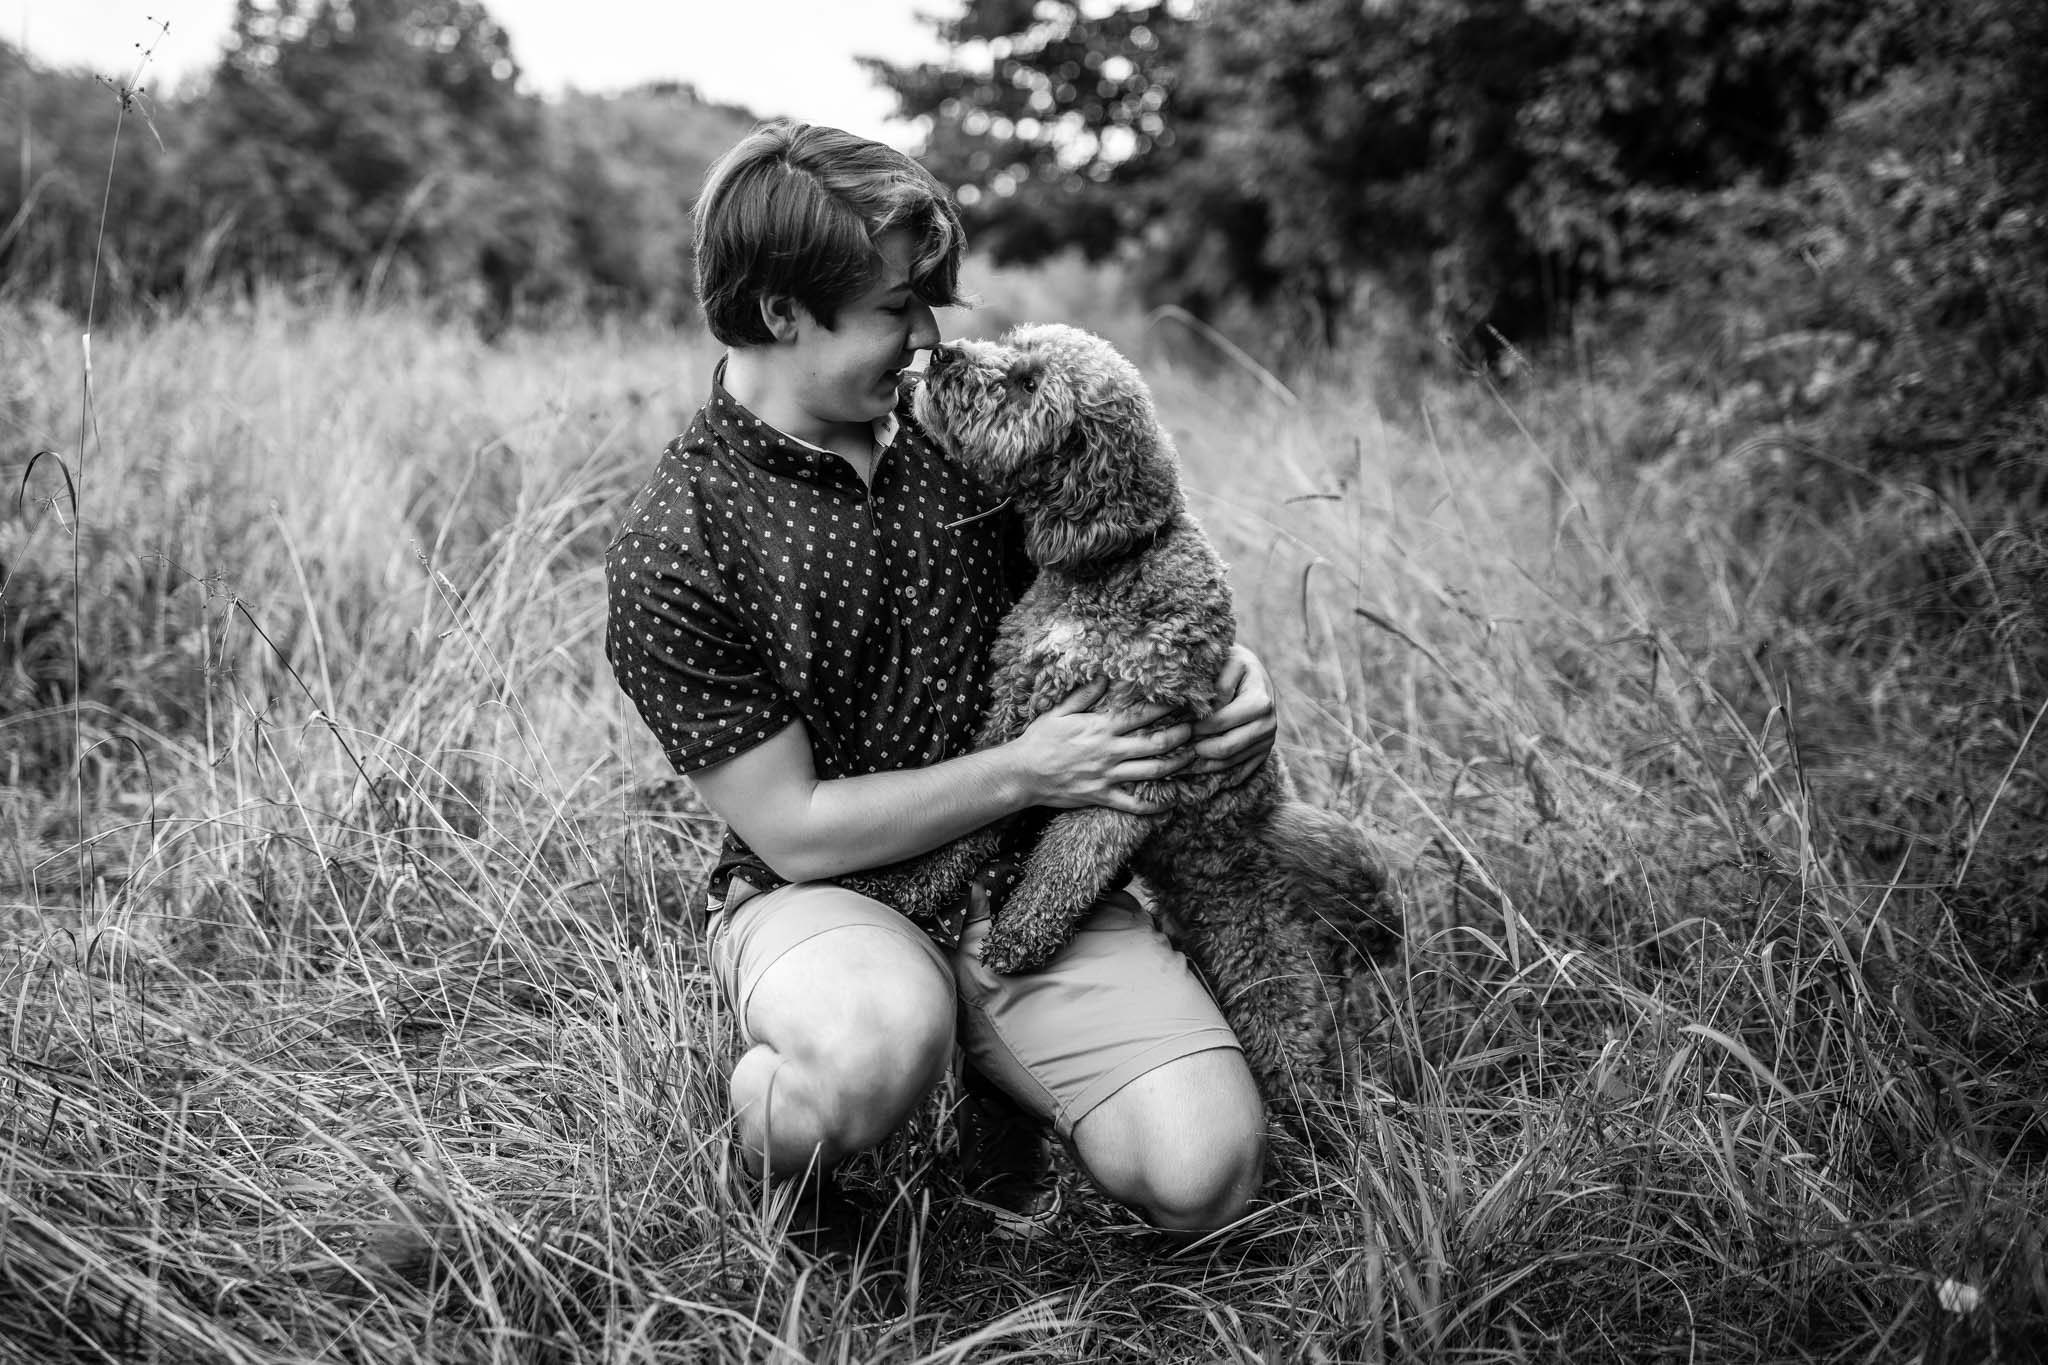 Black and white high school senior portrait of a young man kneeling with his dog in a field of long grass and trees in Massachusetts